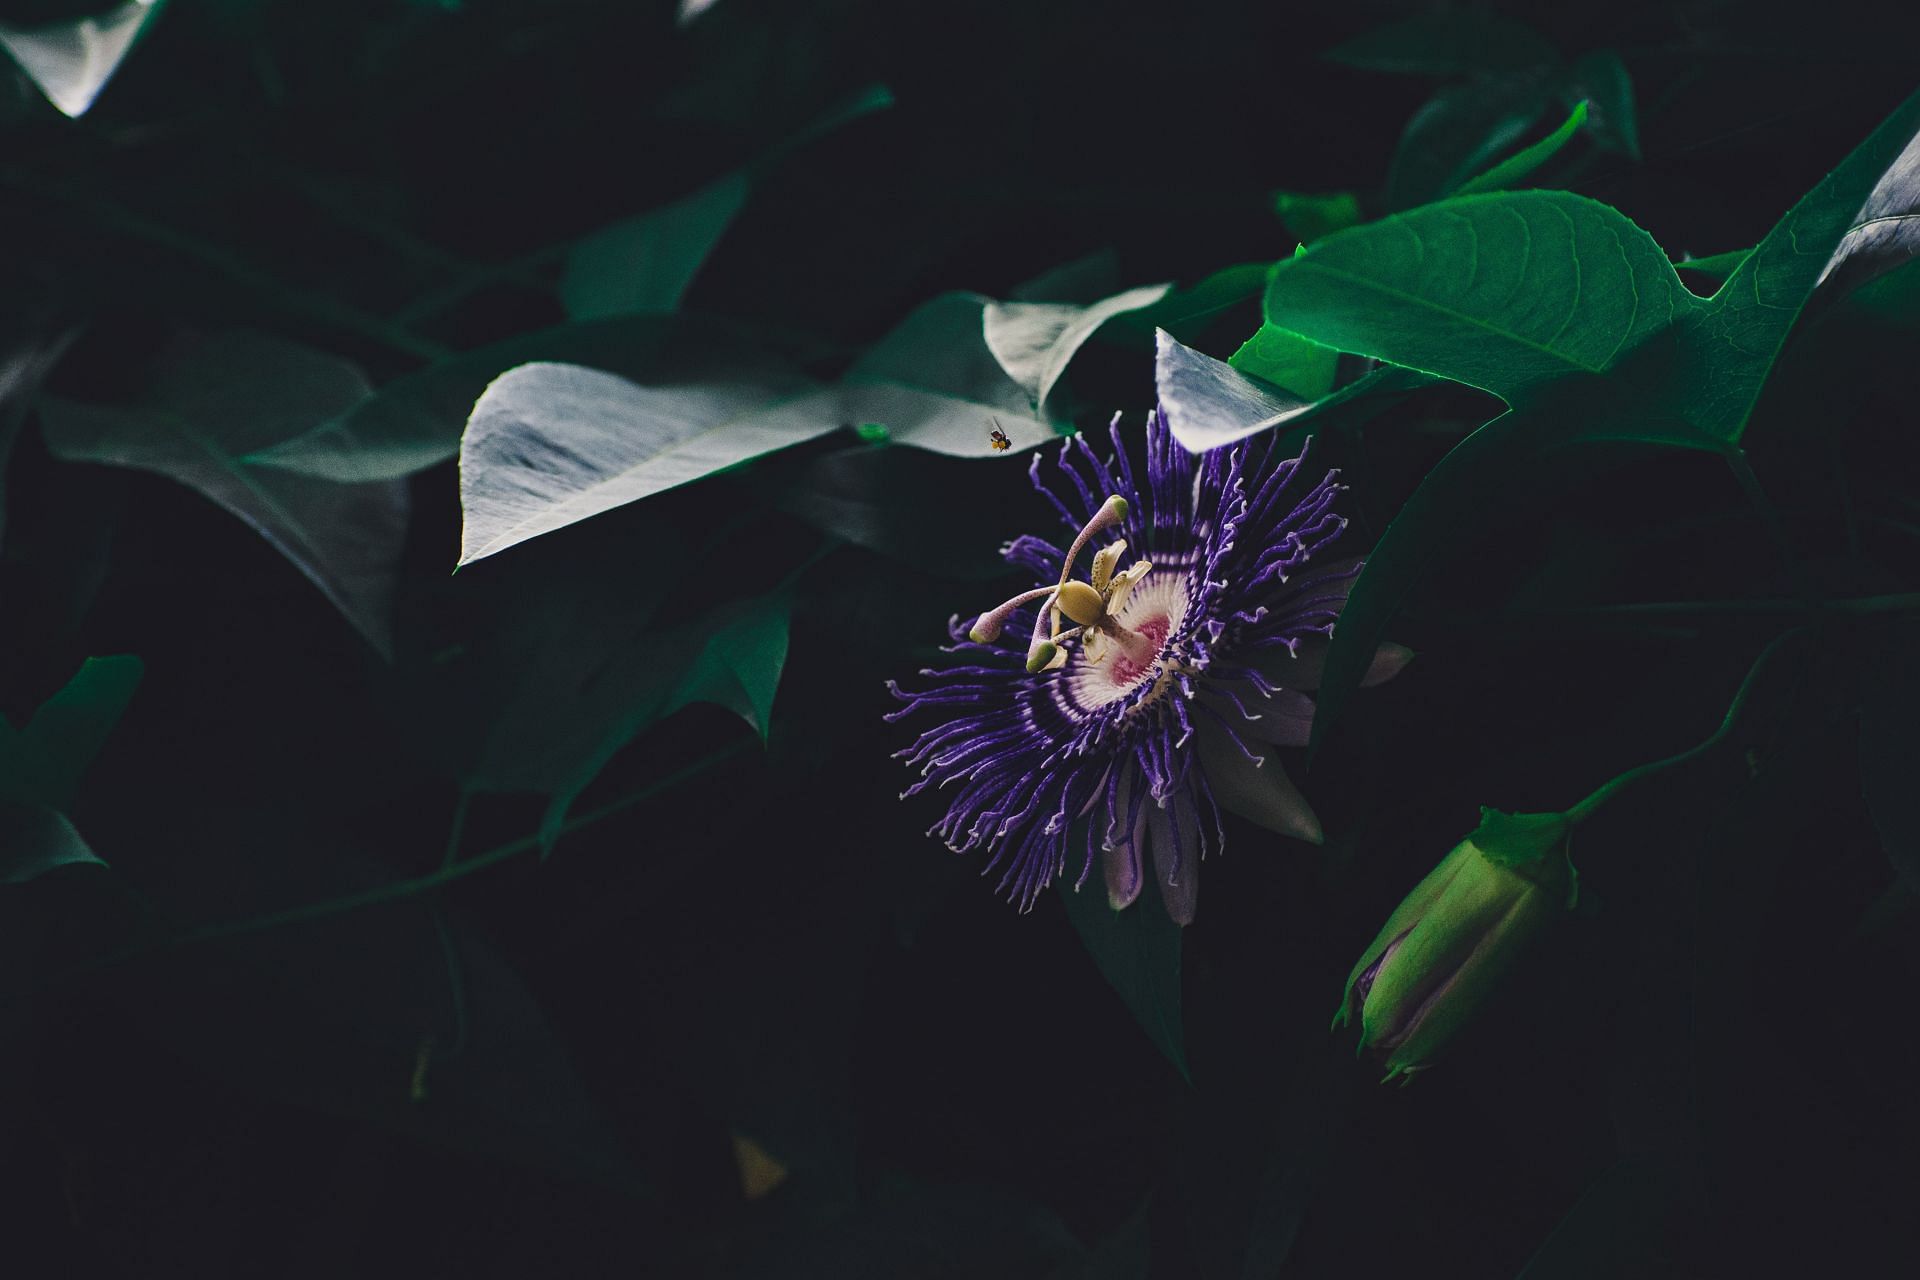 Benefits of passion flower- It helps reducing anxiety. (Image via Unsplash/ Shyam)